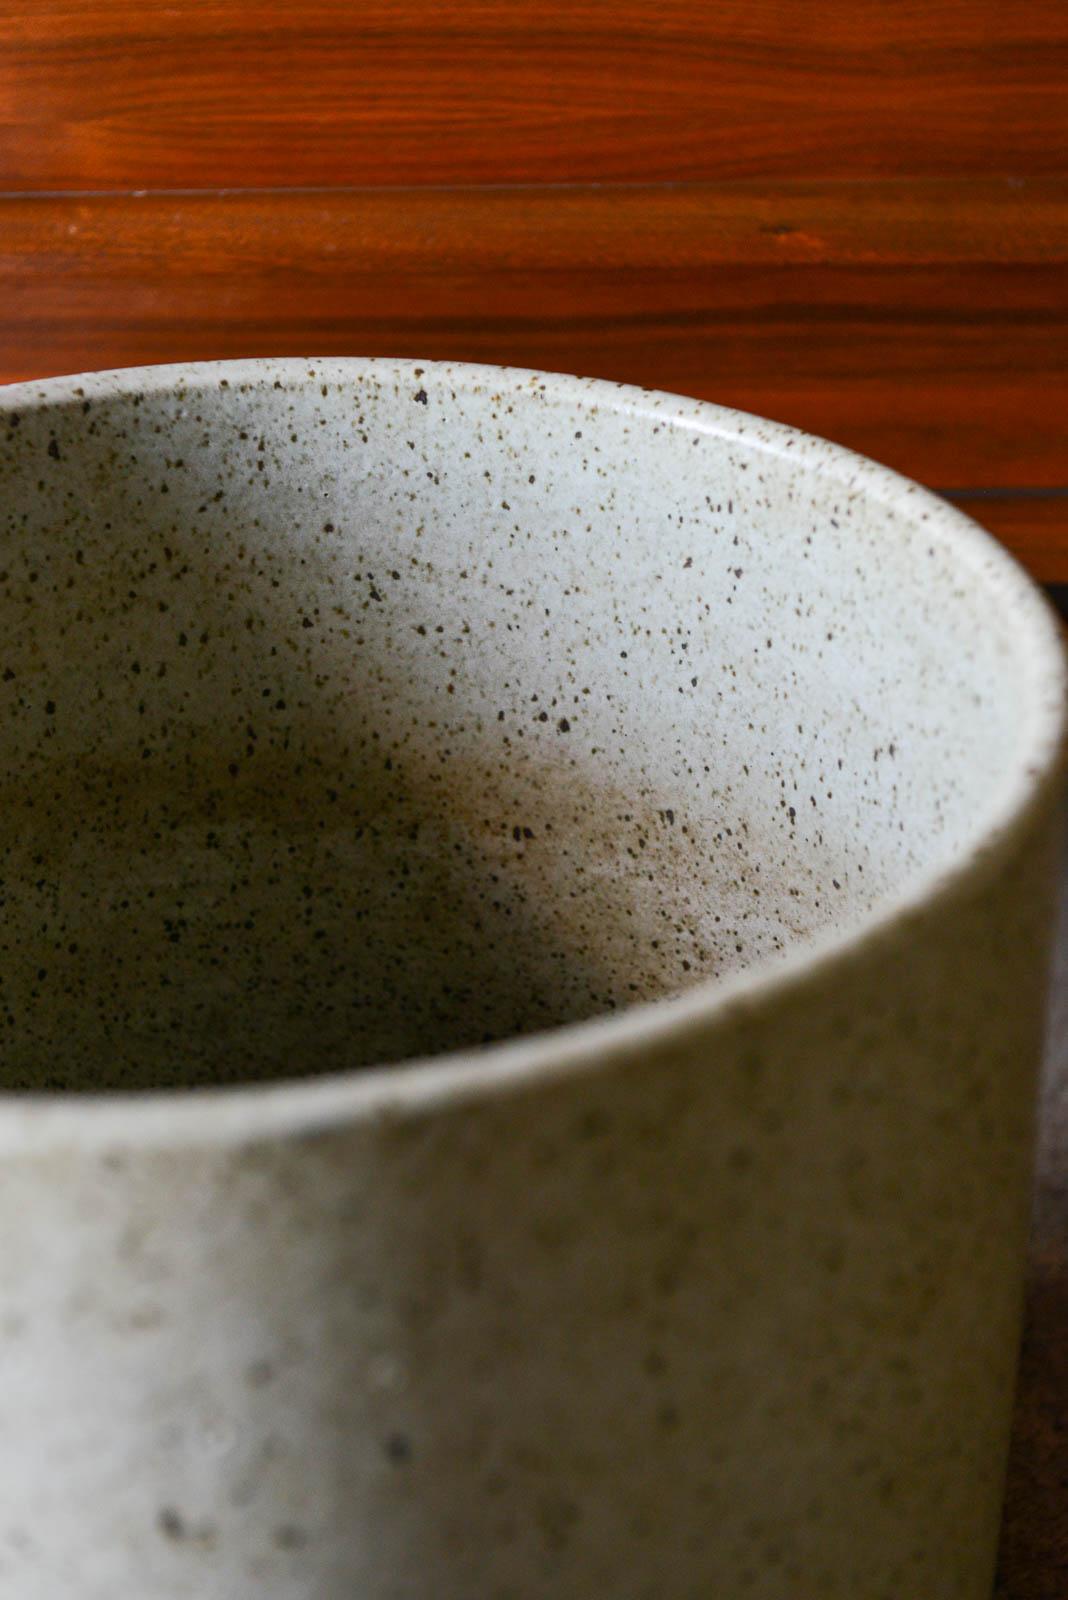 Mid-Century Modern Speckled Glaze Planter by David Cressey for Architectural Pottery, ca. 1970